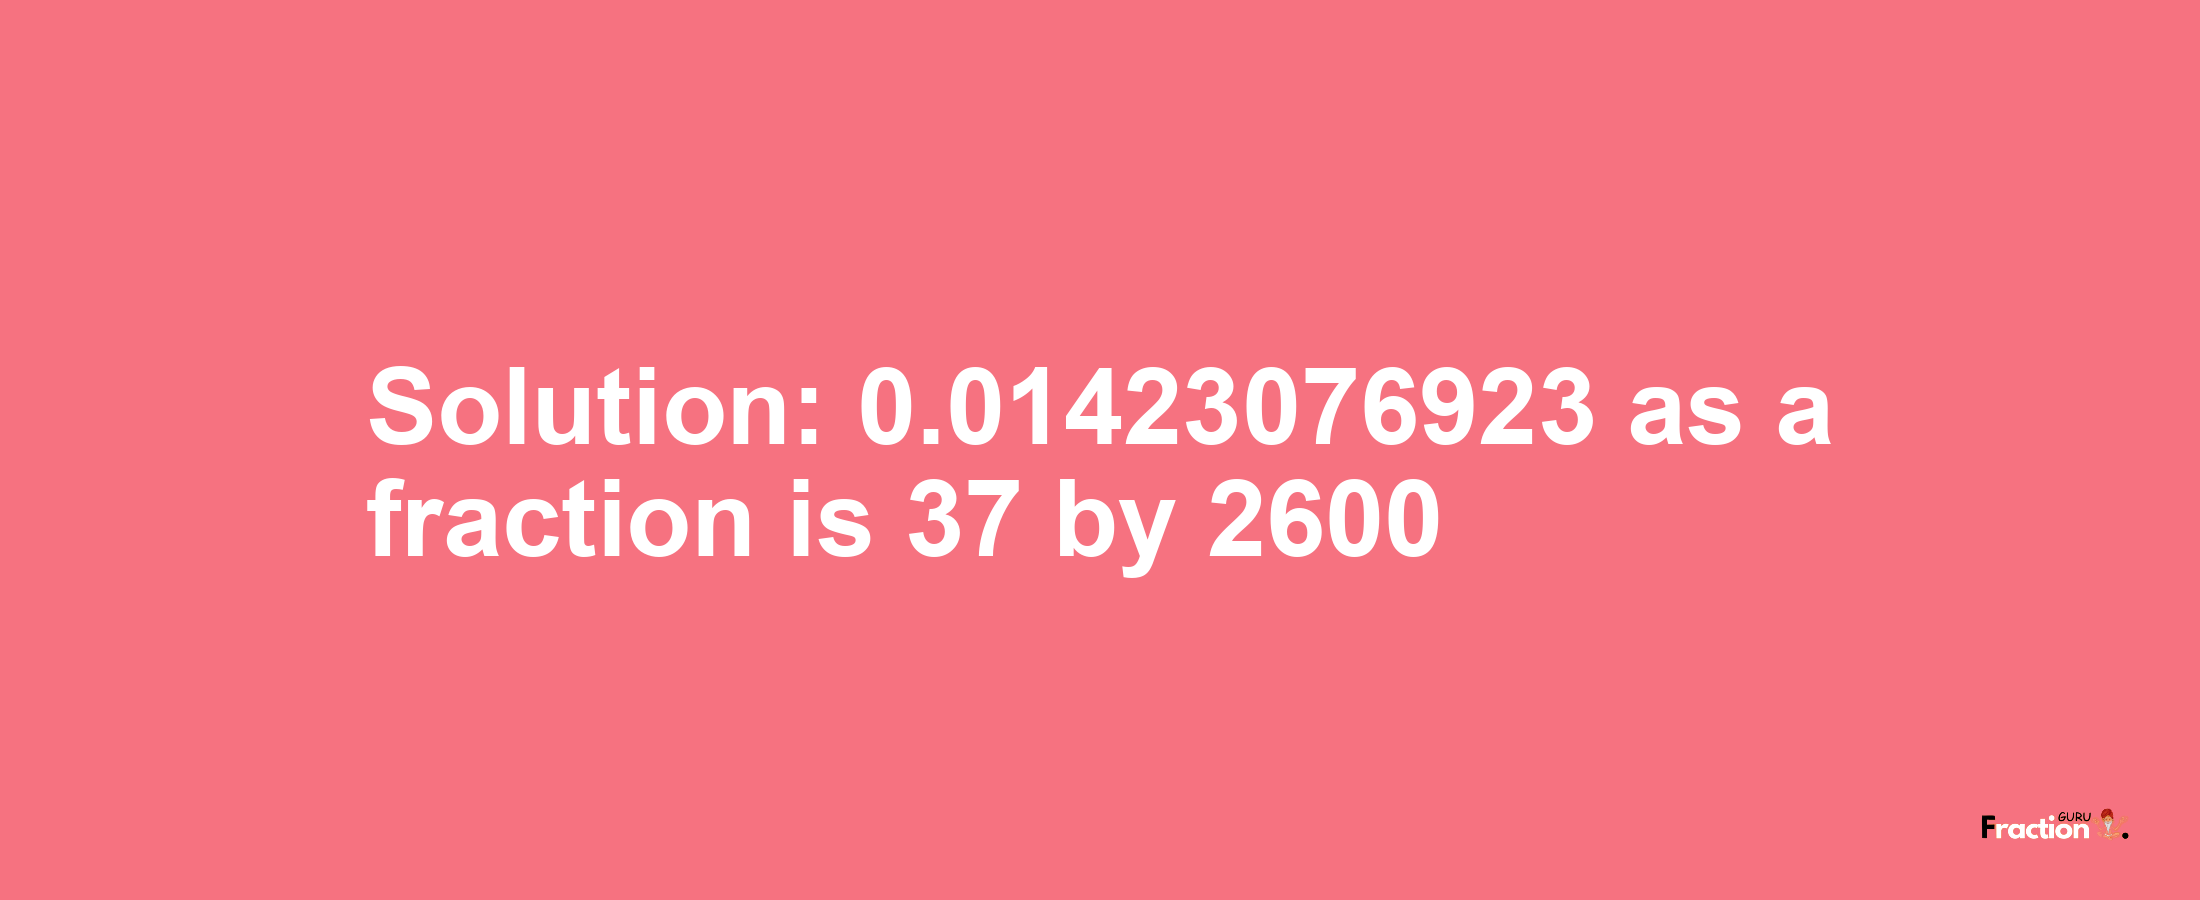 Solution:0.01423076923 as a fraction is 37/2600